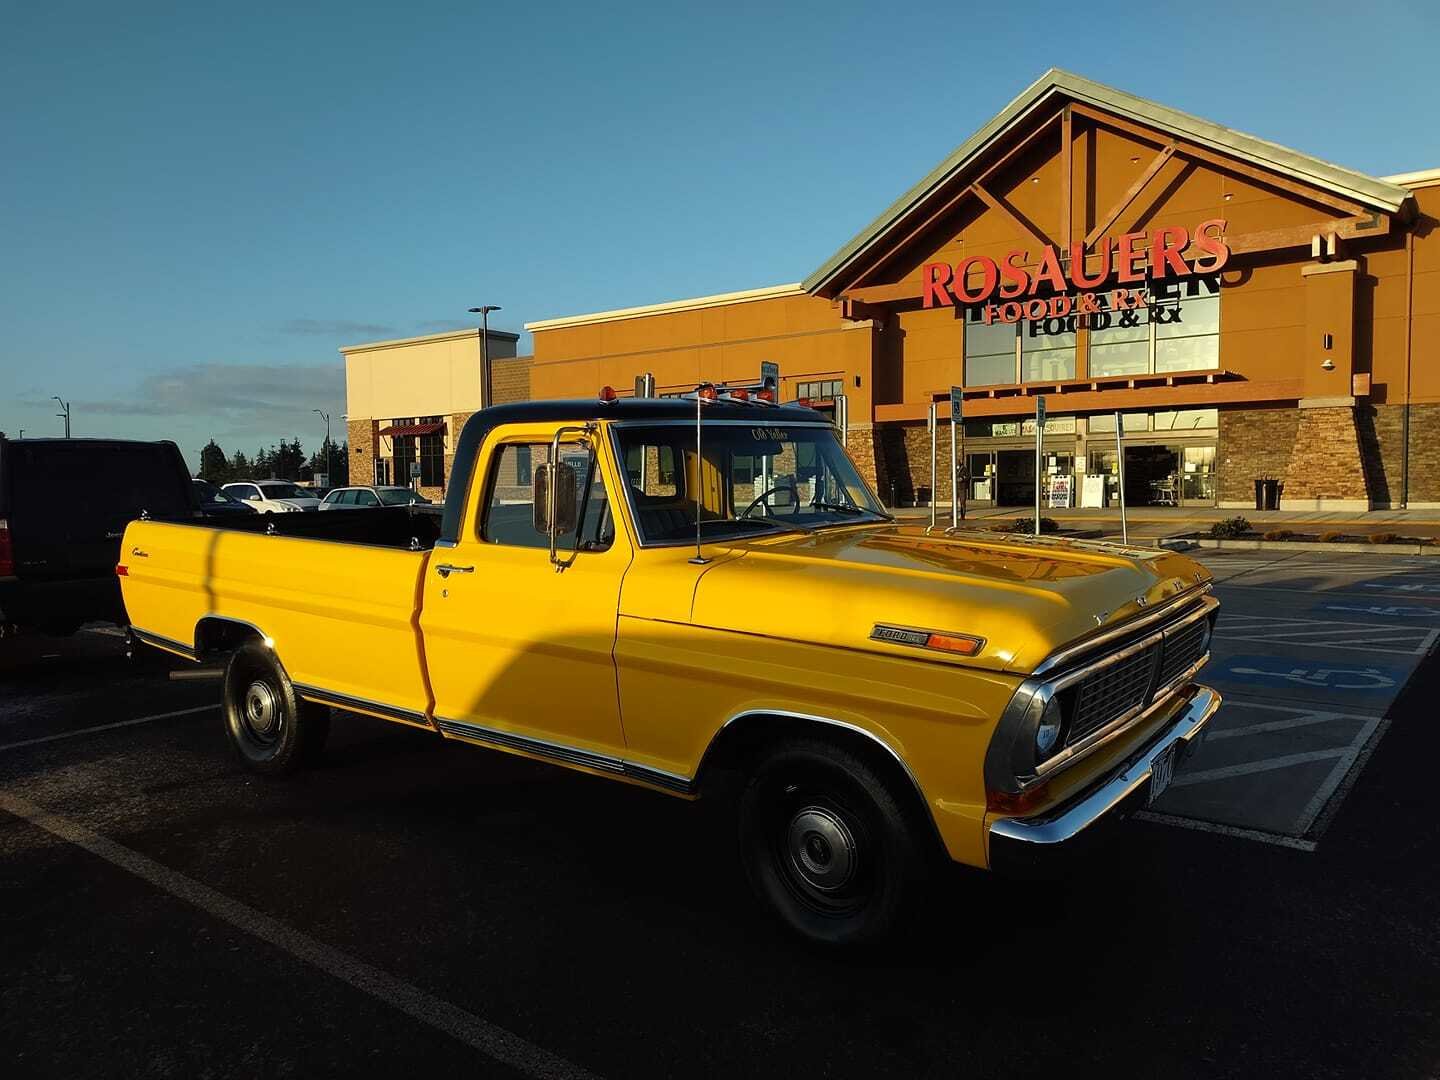 Rob Aichele said the truck’s “maiden voyage” once it was complete was a trip to Rosauers grocery to get coffee with some friends.